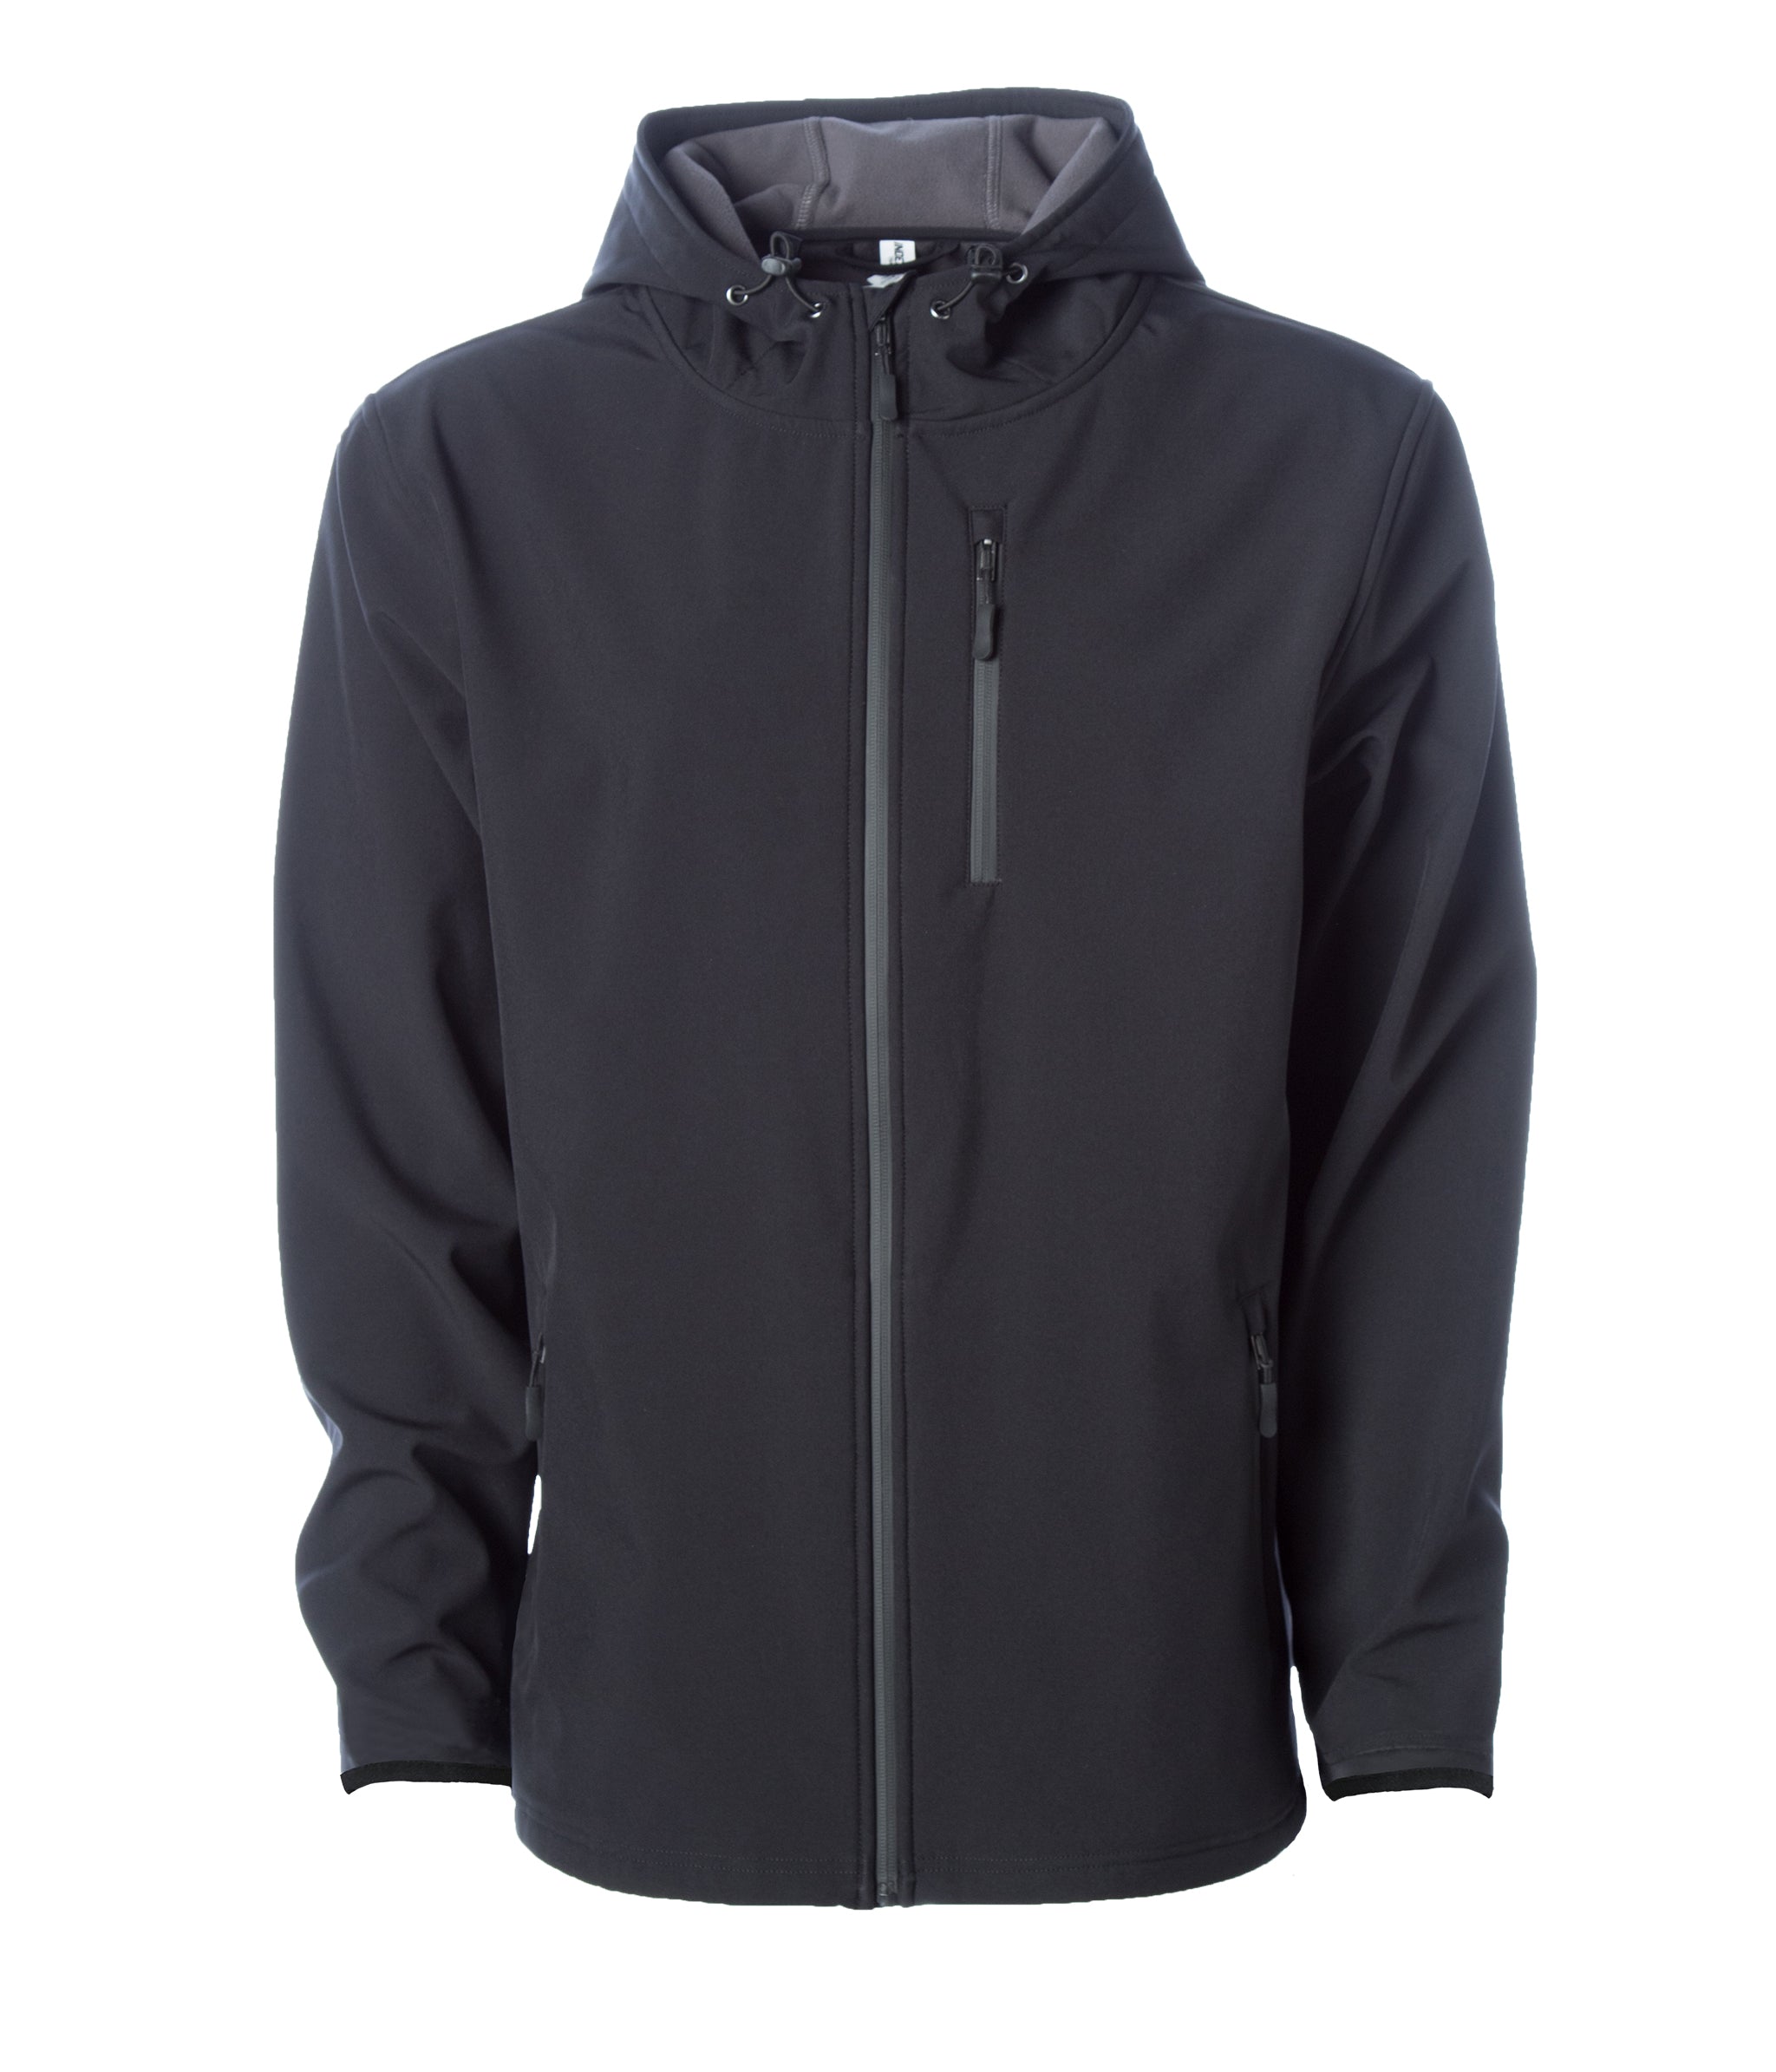 Poly-Tech Water Resistant Soft Shell Jacket